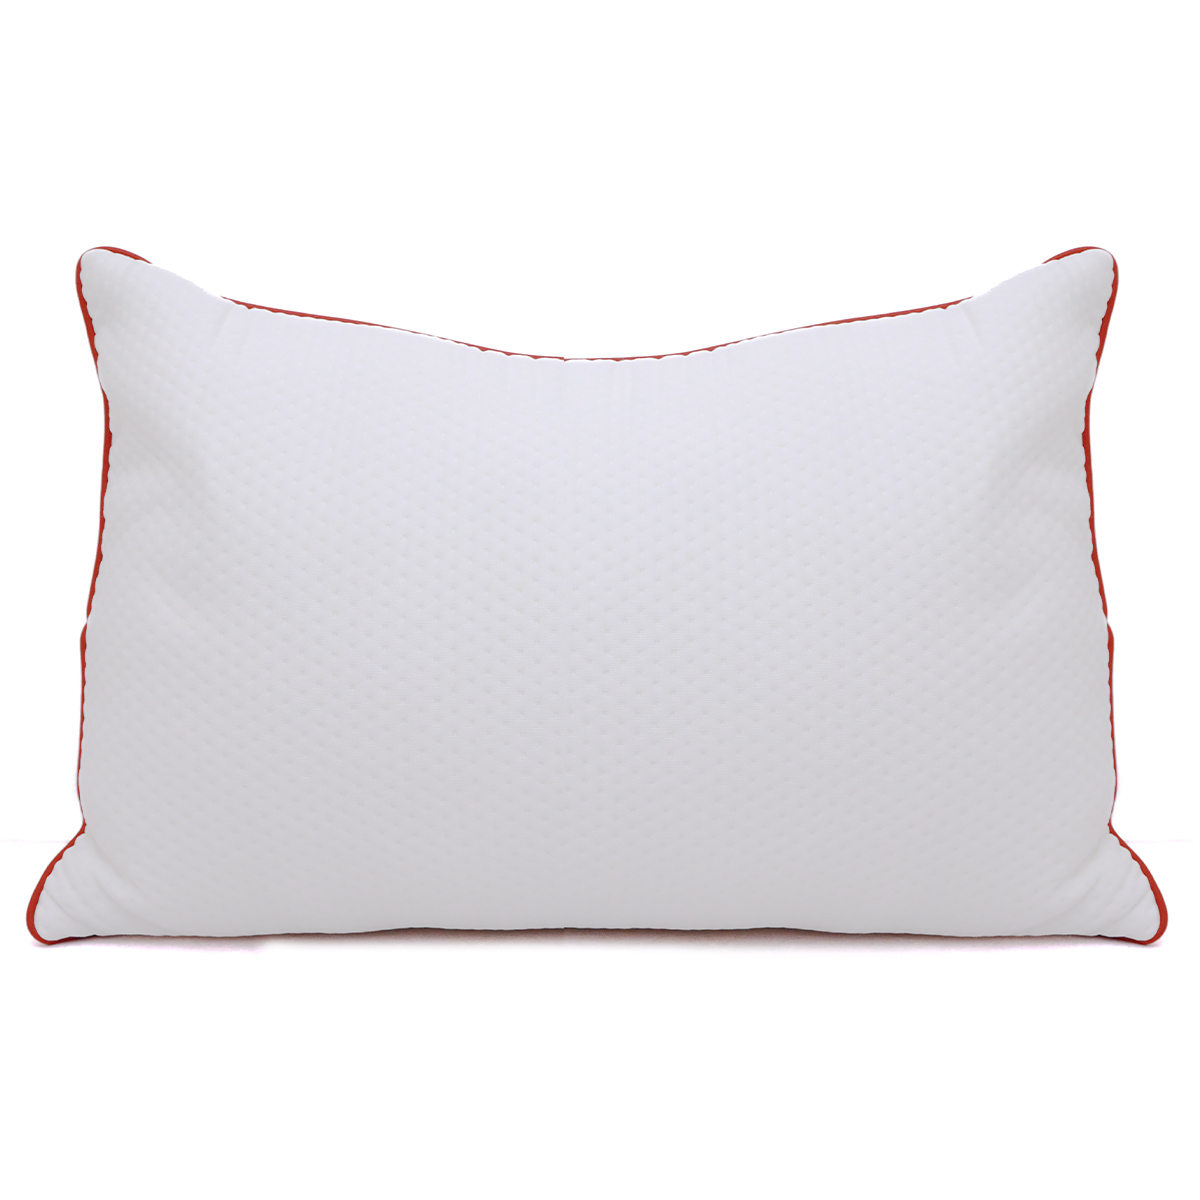 Home Well Kniteed Pillow Assorted Colour